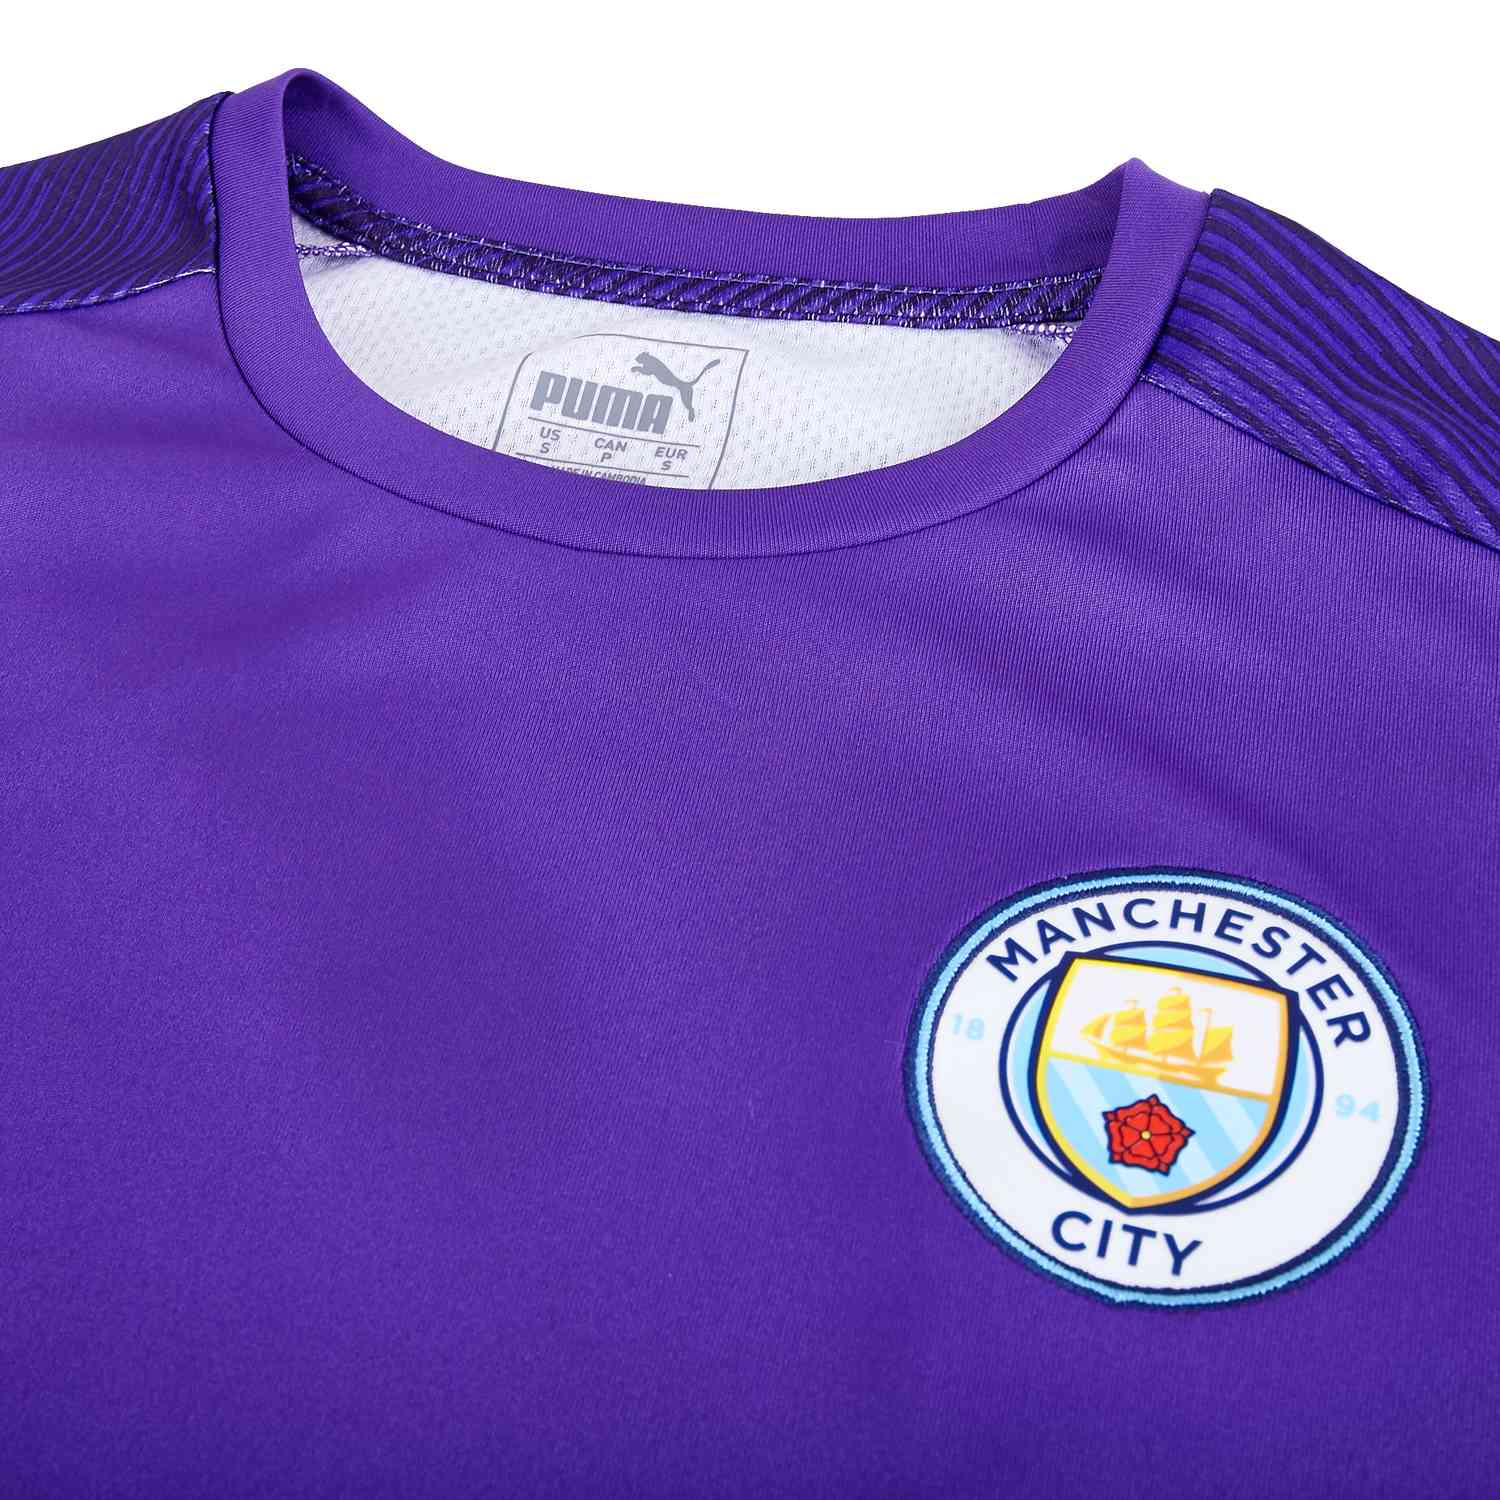 purple and blue jersey